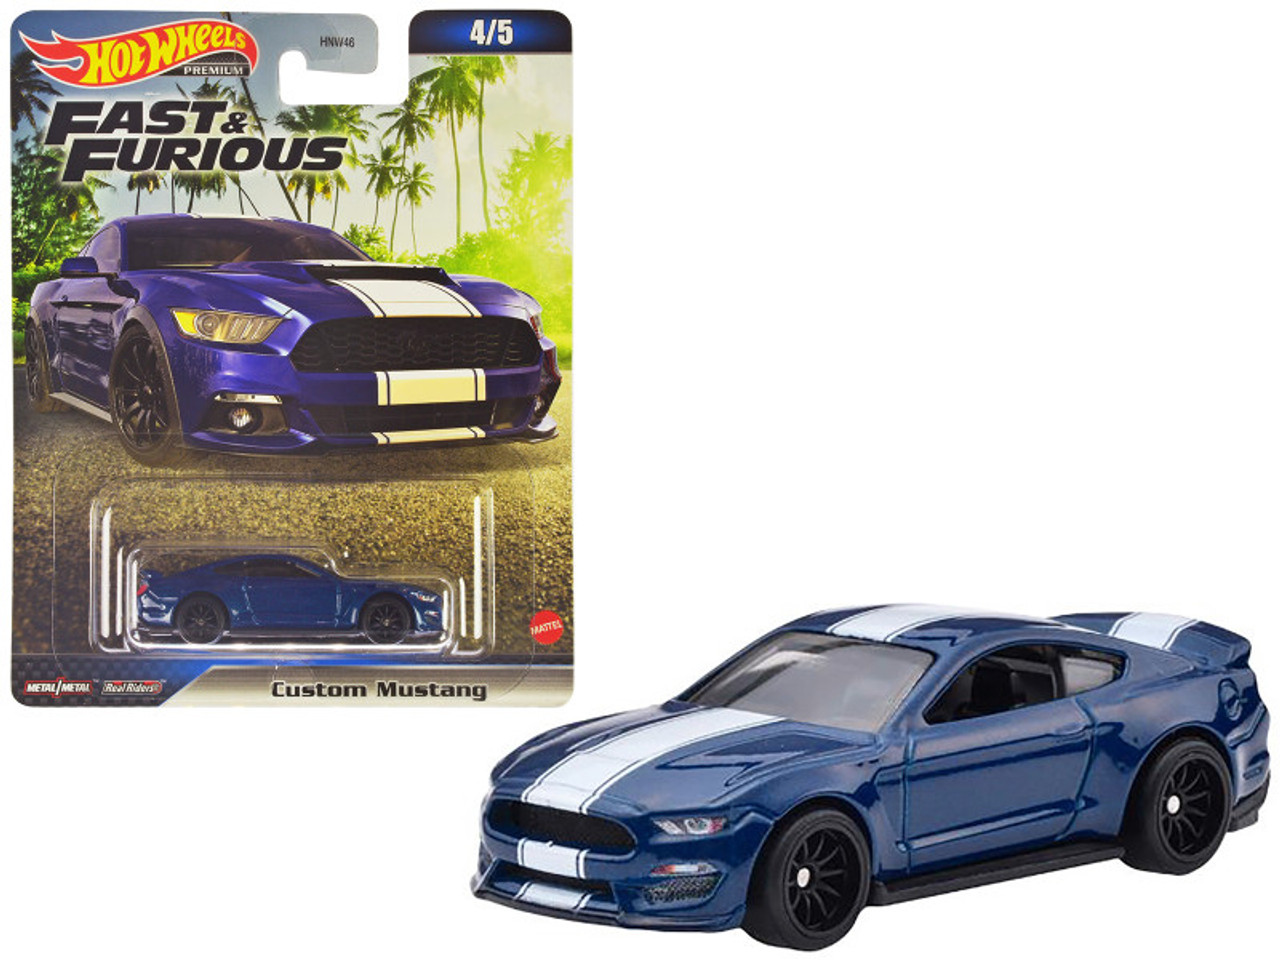 Custom Ford Mustang Blue Metallic with White Stripes "F9" (2021) Movie "Fast & Furious" Series Diecast Model Car by Hot Wheels